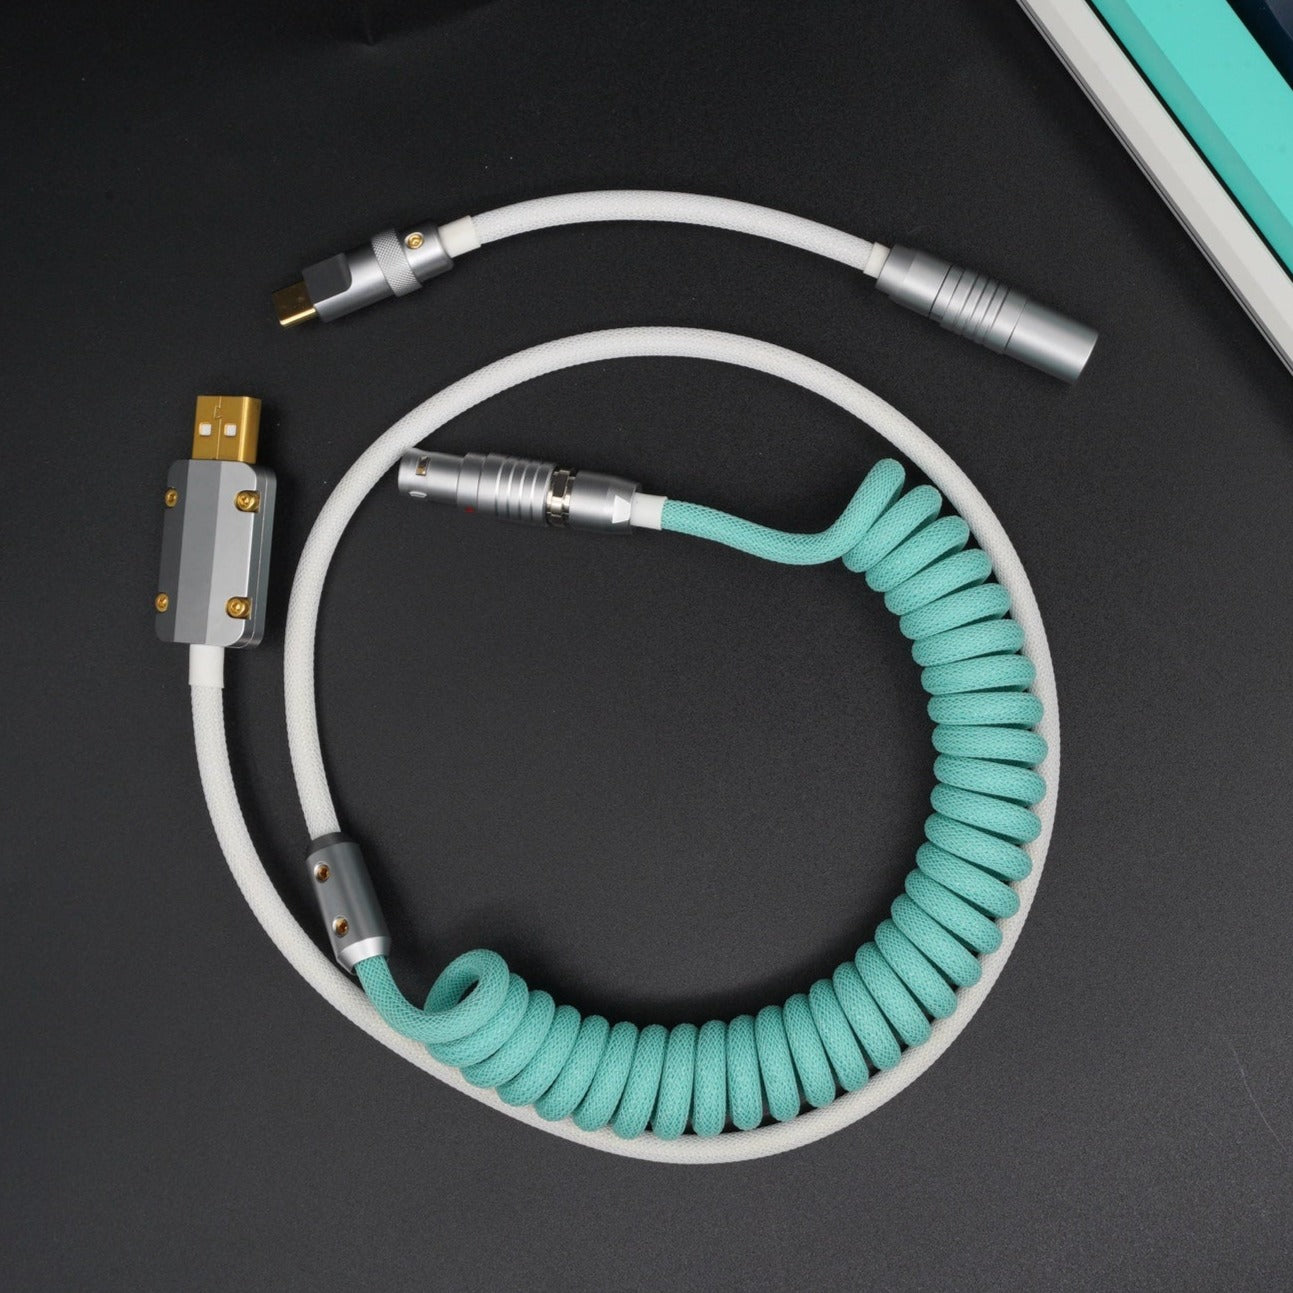 Sleeved Coiled Keyboard Aviator Cable, Lemo Style Connector - Teal/White